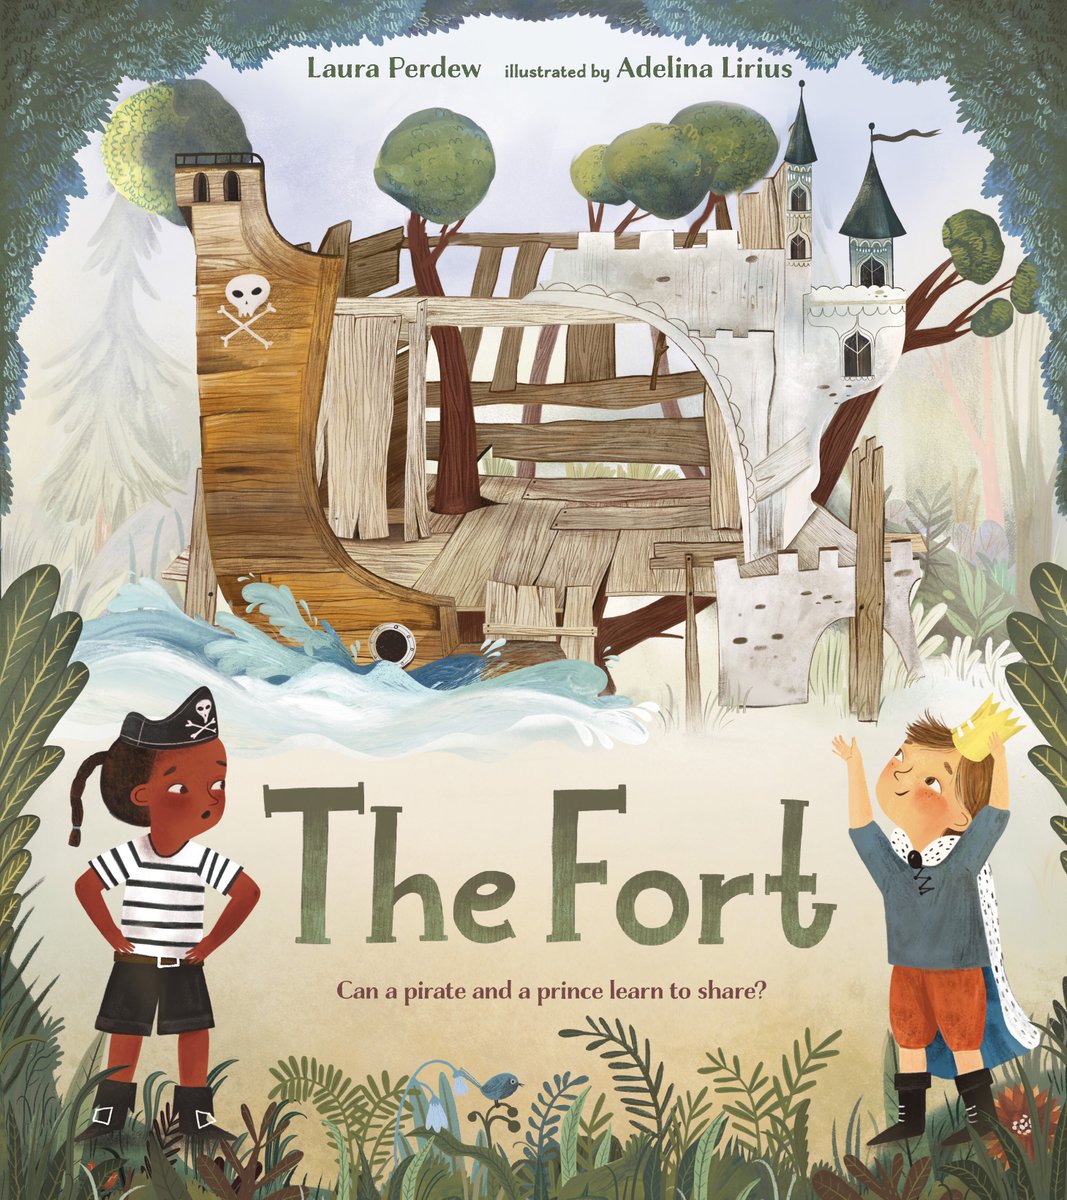 Happy WORLD READ ALOUD DAY! I'm celebrating with virtual visits to read THE FORT and to help inspire a love of reading and stories. 

#WRAD #WRAD2023 #childrensbooks #earlyliteracy #reading #kidlit
@SCBWIRockyMtn @PageStreetKids @adelina